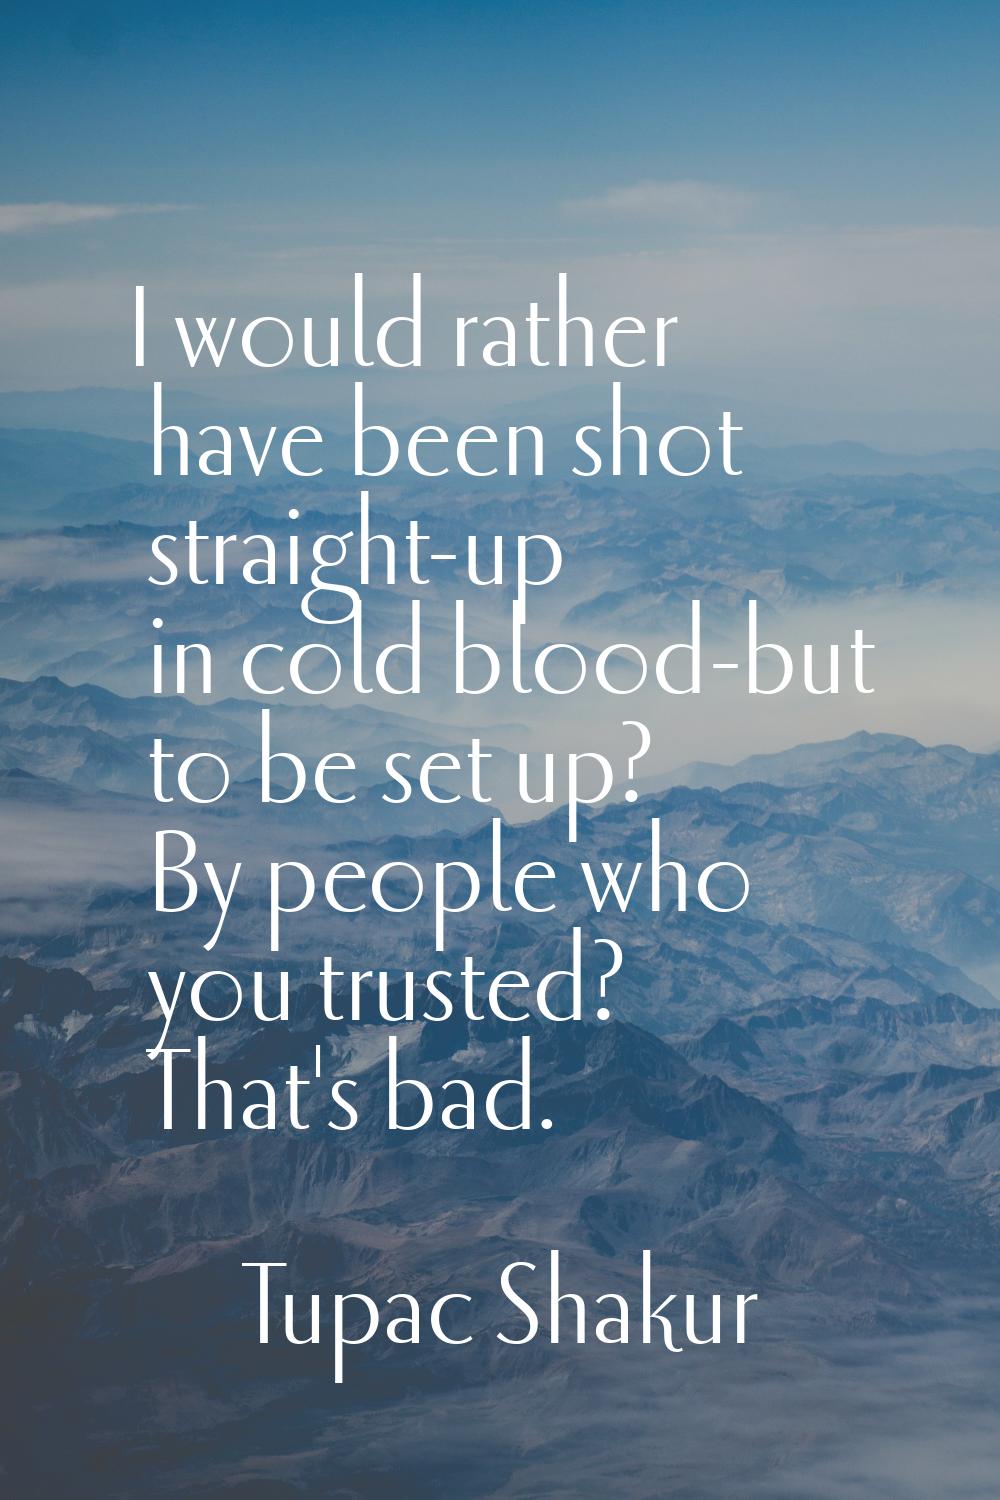 I would rather have been shot straight-up in cold blood-but to be set up? By people who you trusted